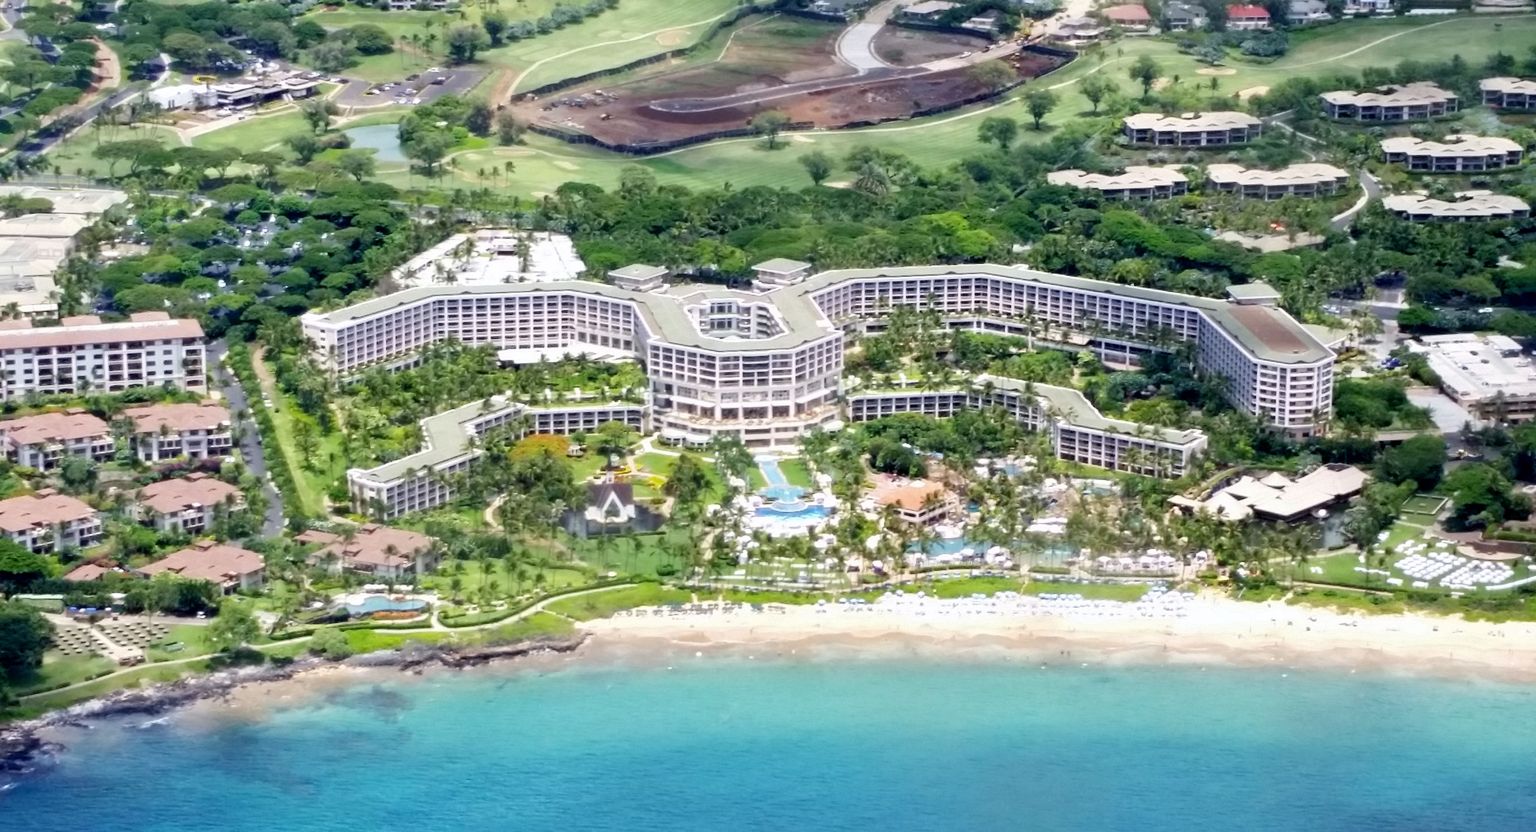 Overhead of The Grand Wailea, from the helicopter.